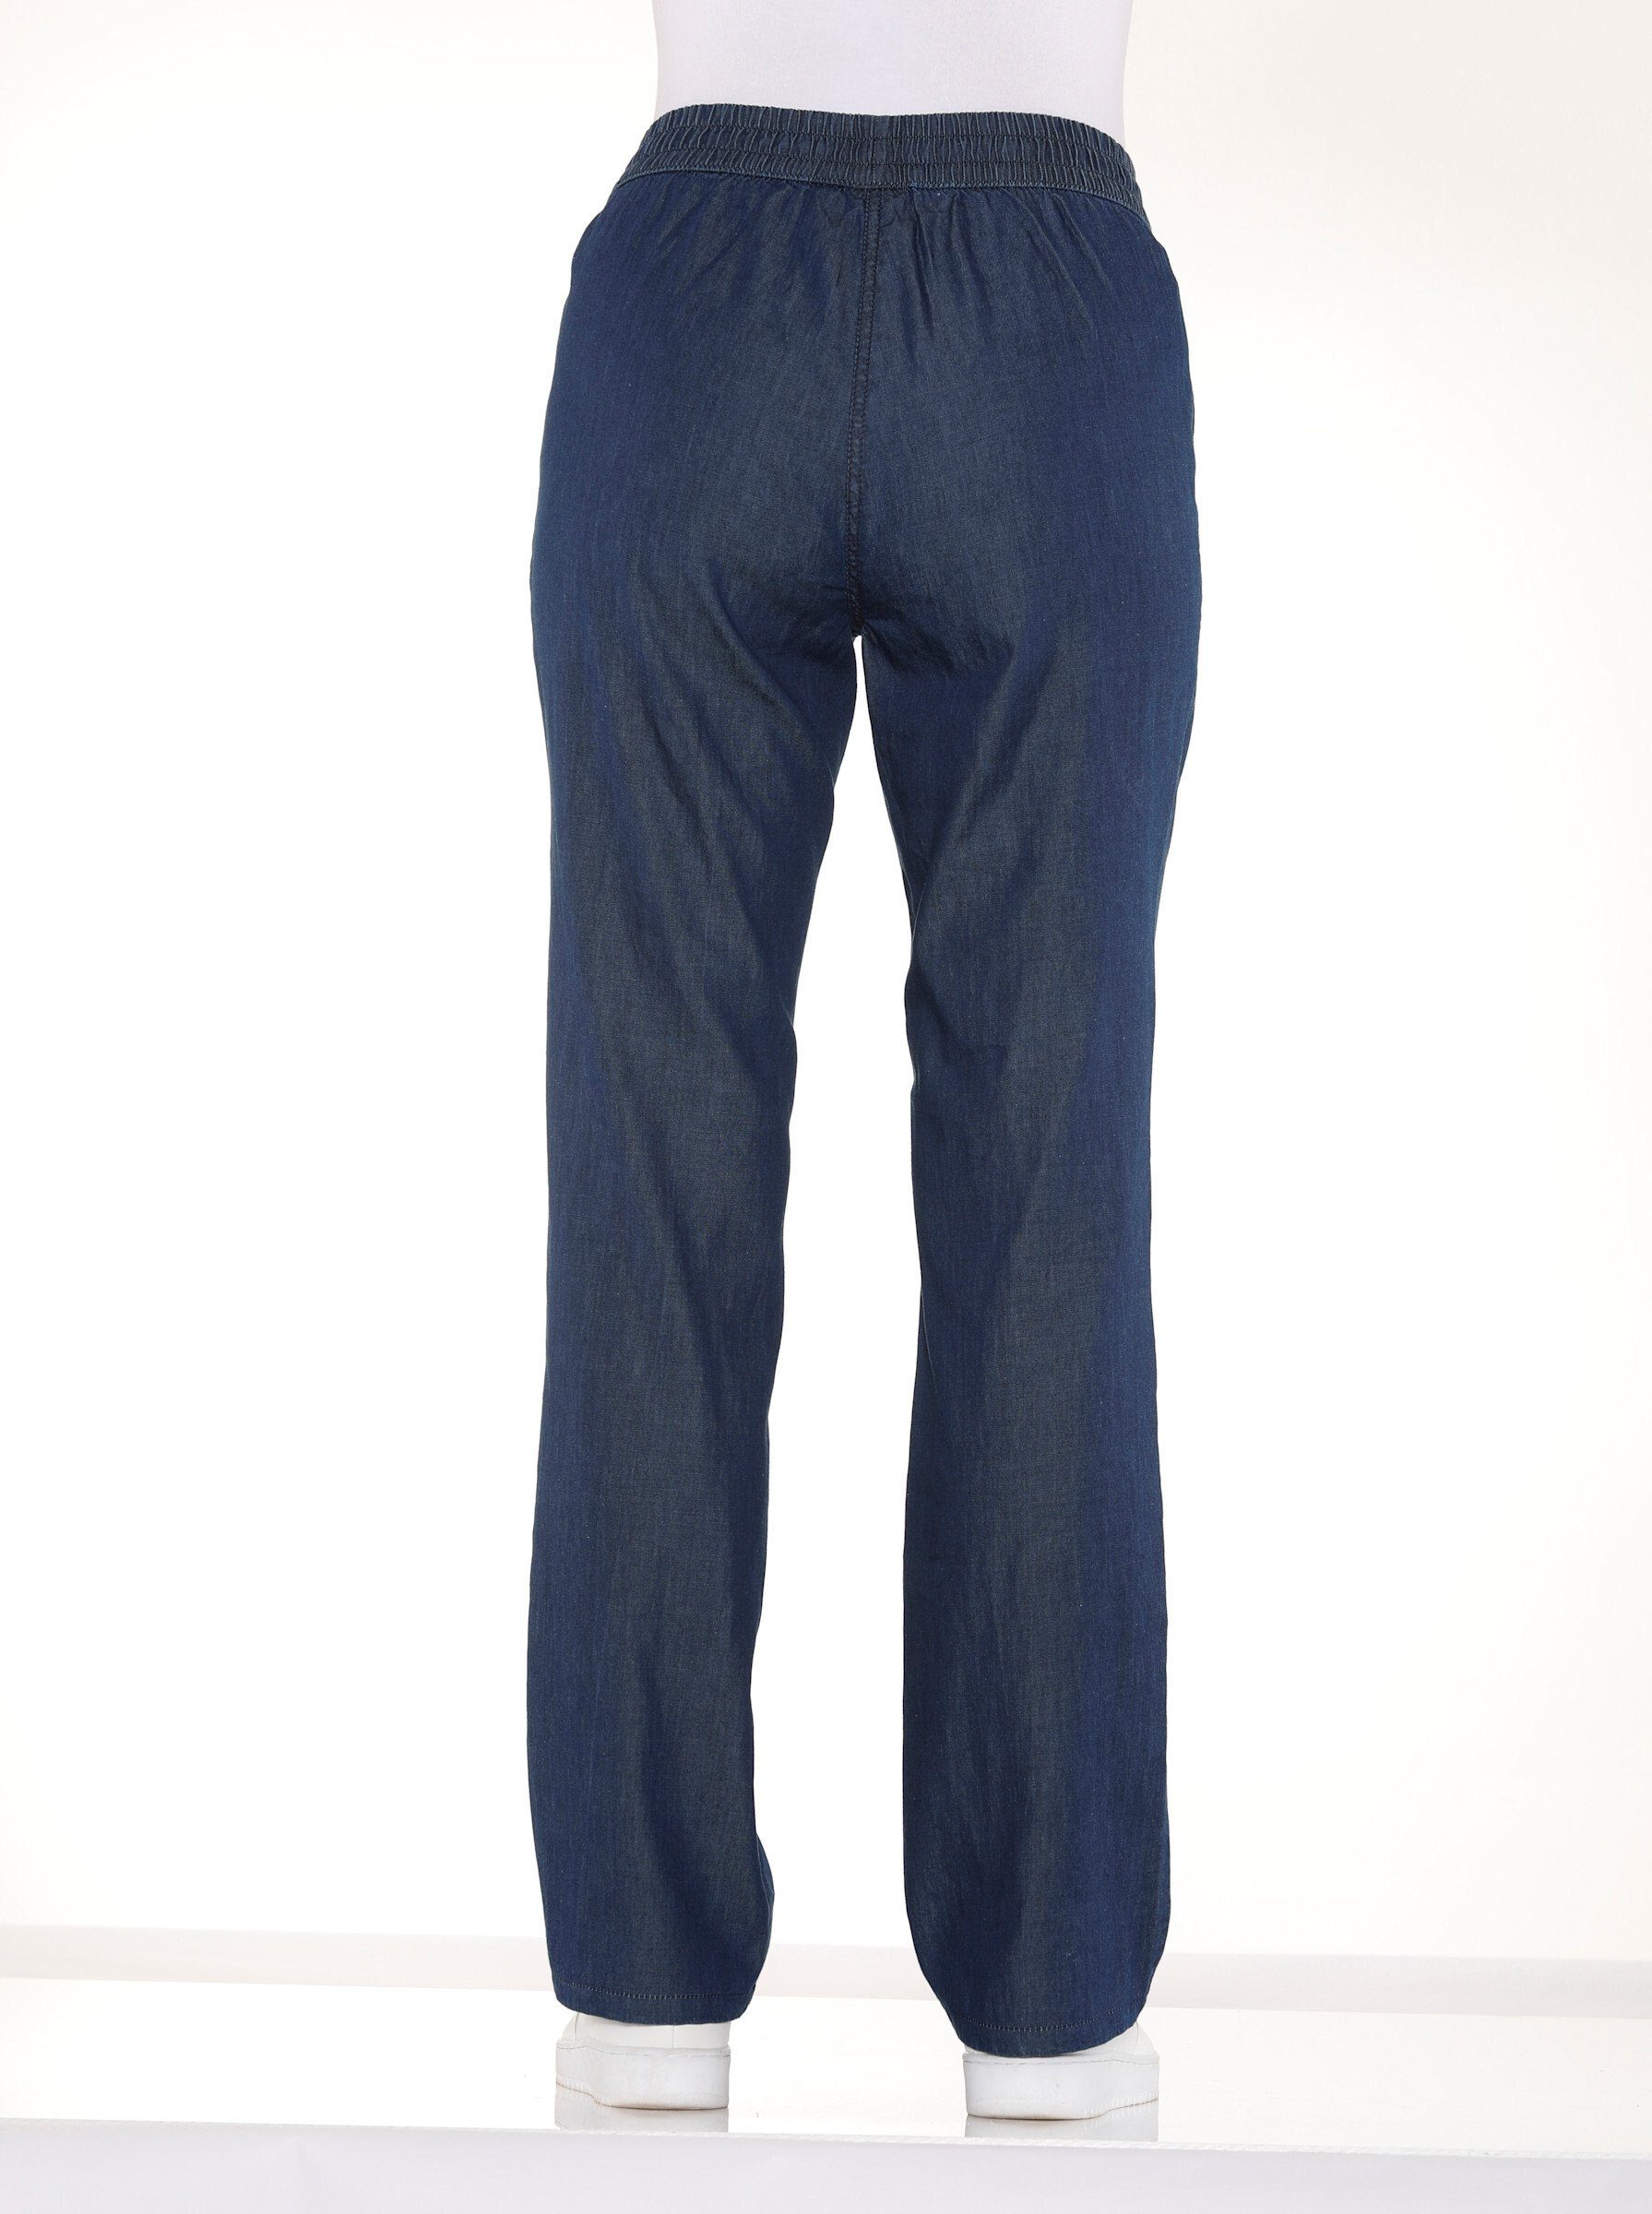 an! Sieh Jeans blue-stone-washed Bequeme